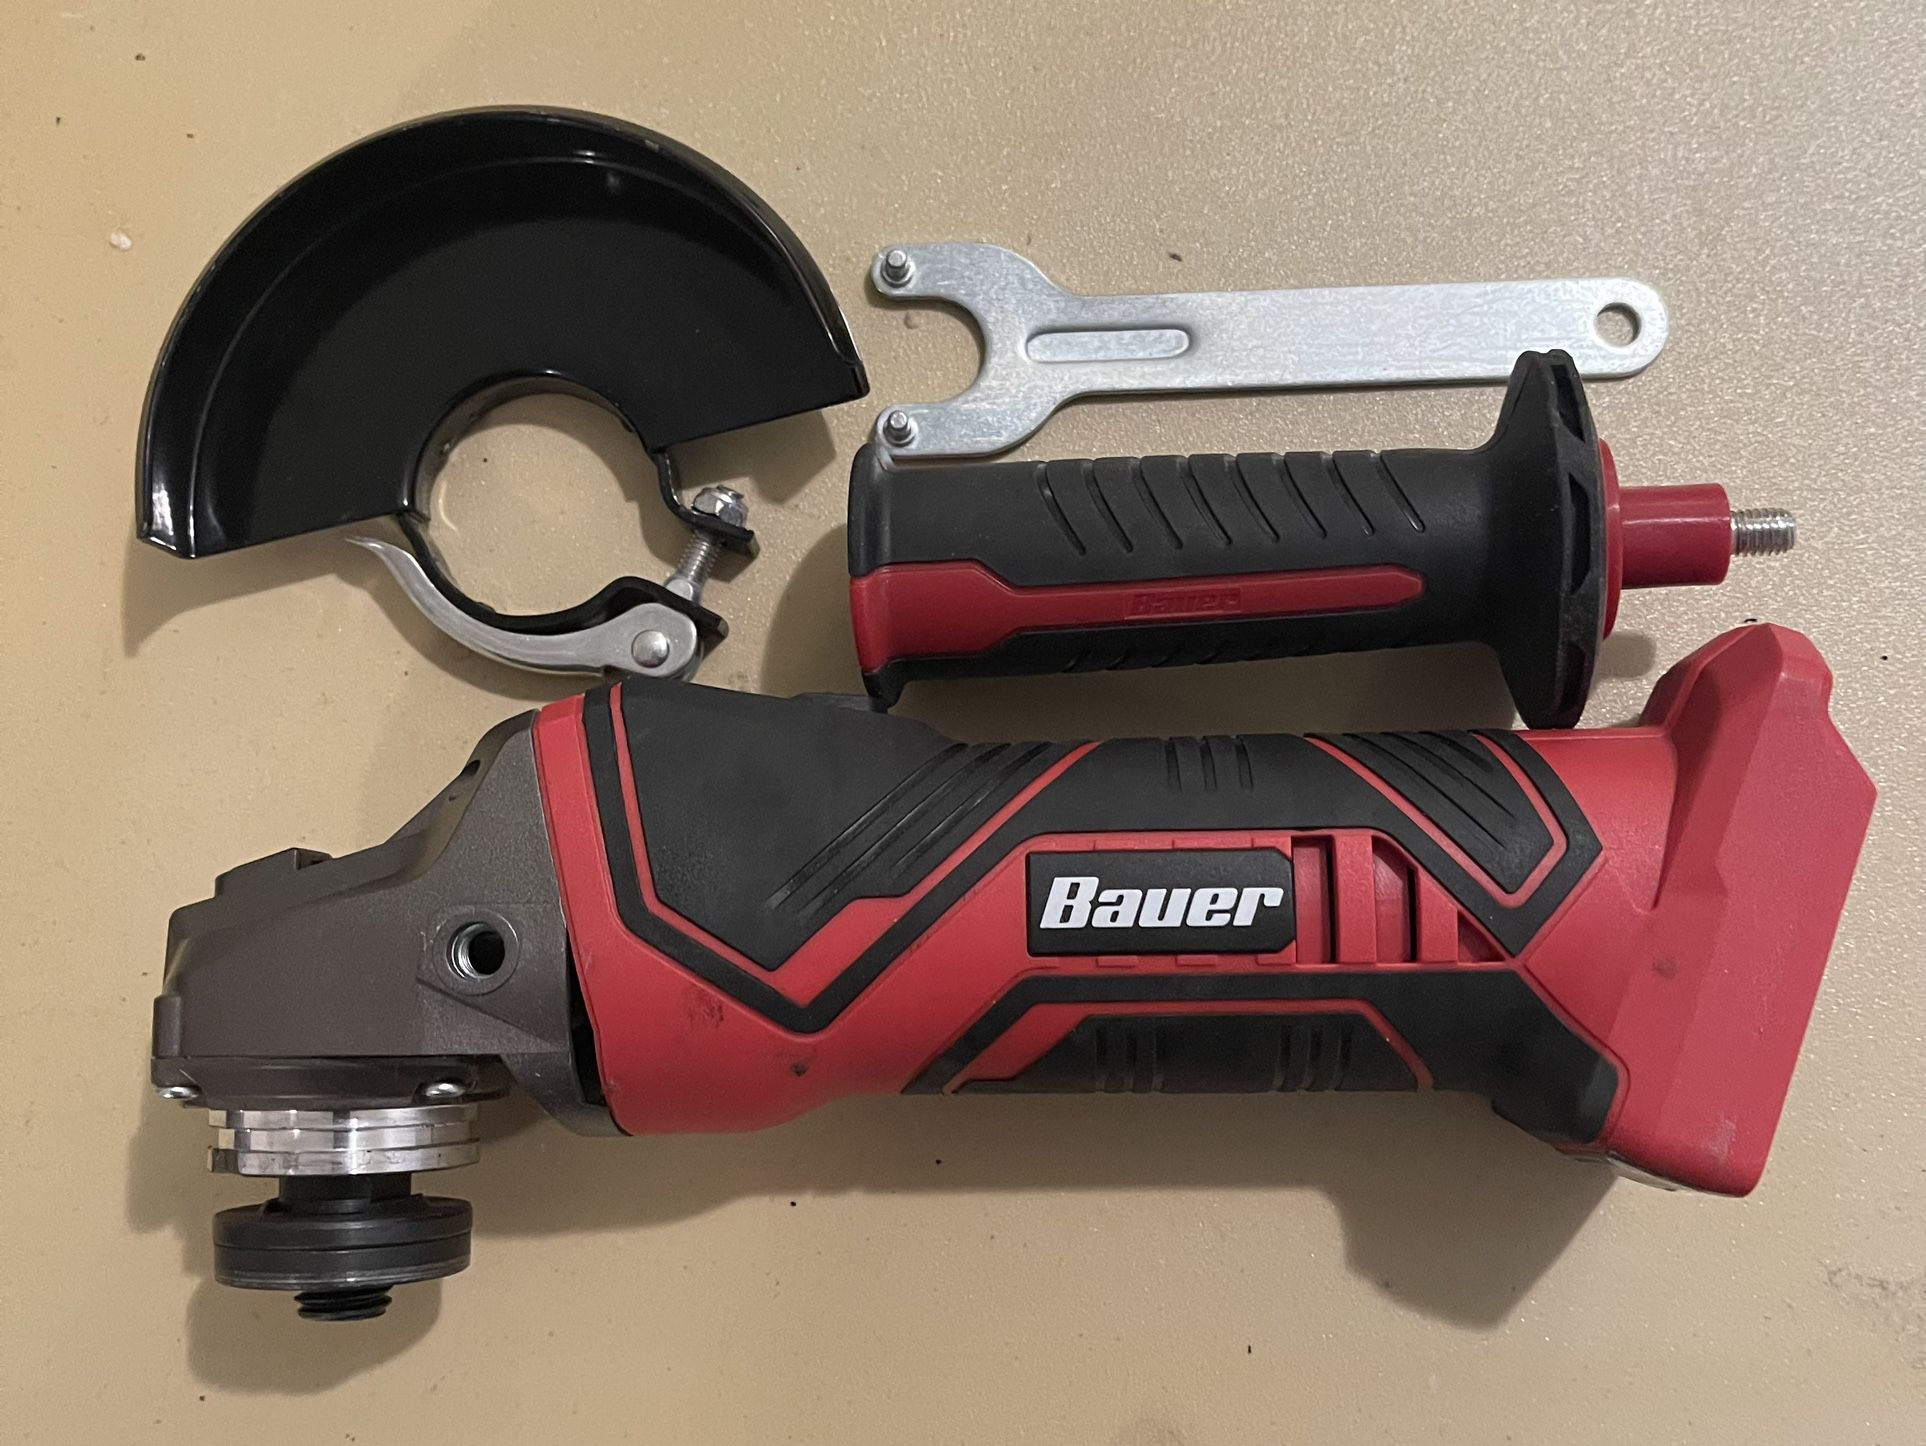 BAUER 20V  BRUSHLESS CORDLESS 4-1/2 ANGLE GRINDER+LithiumBattery+Battery Charger